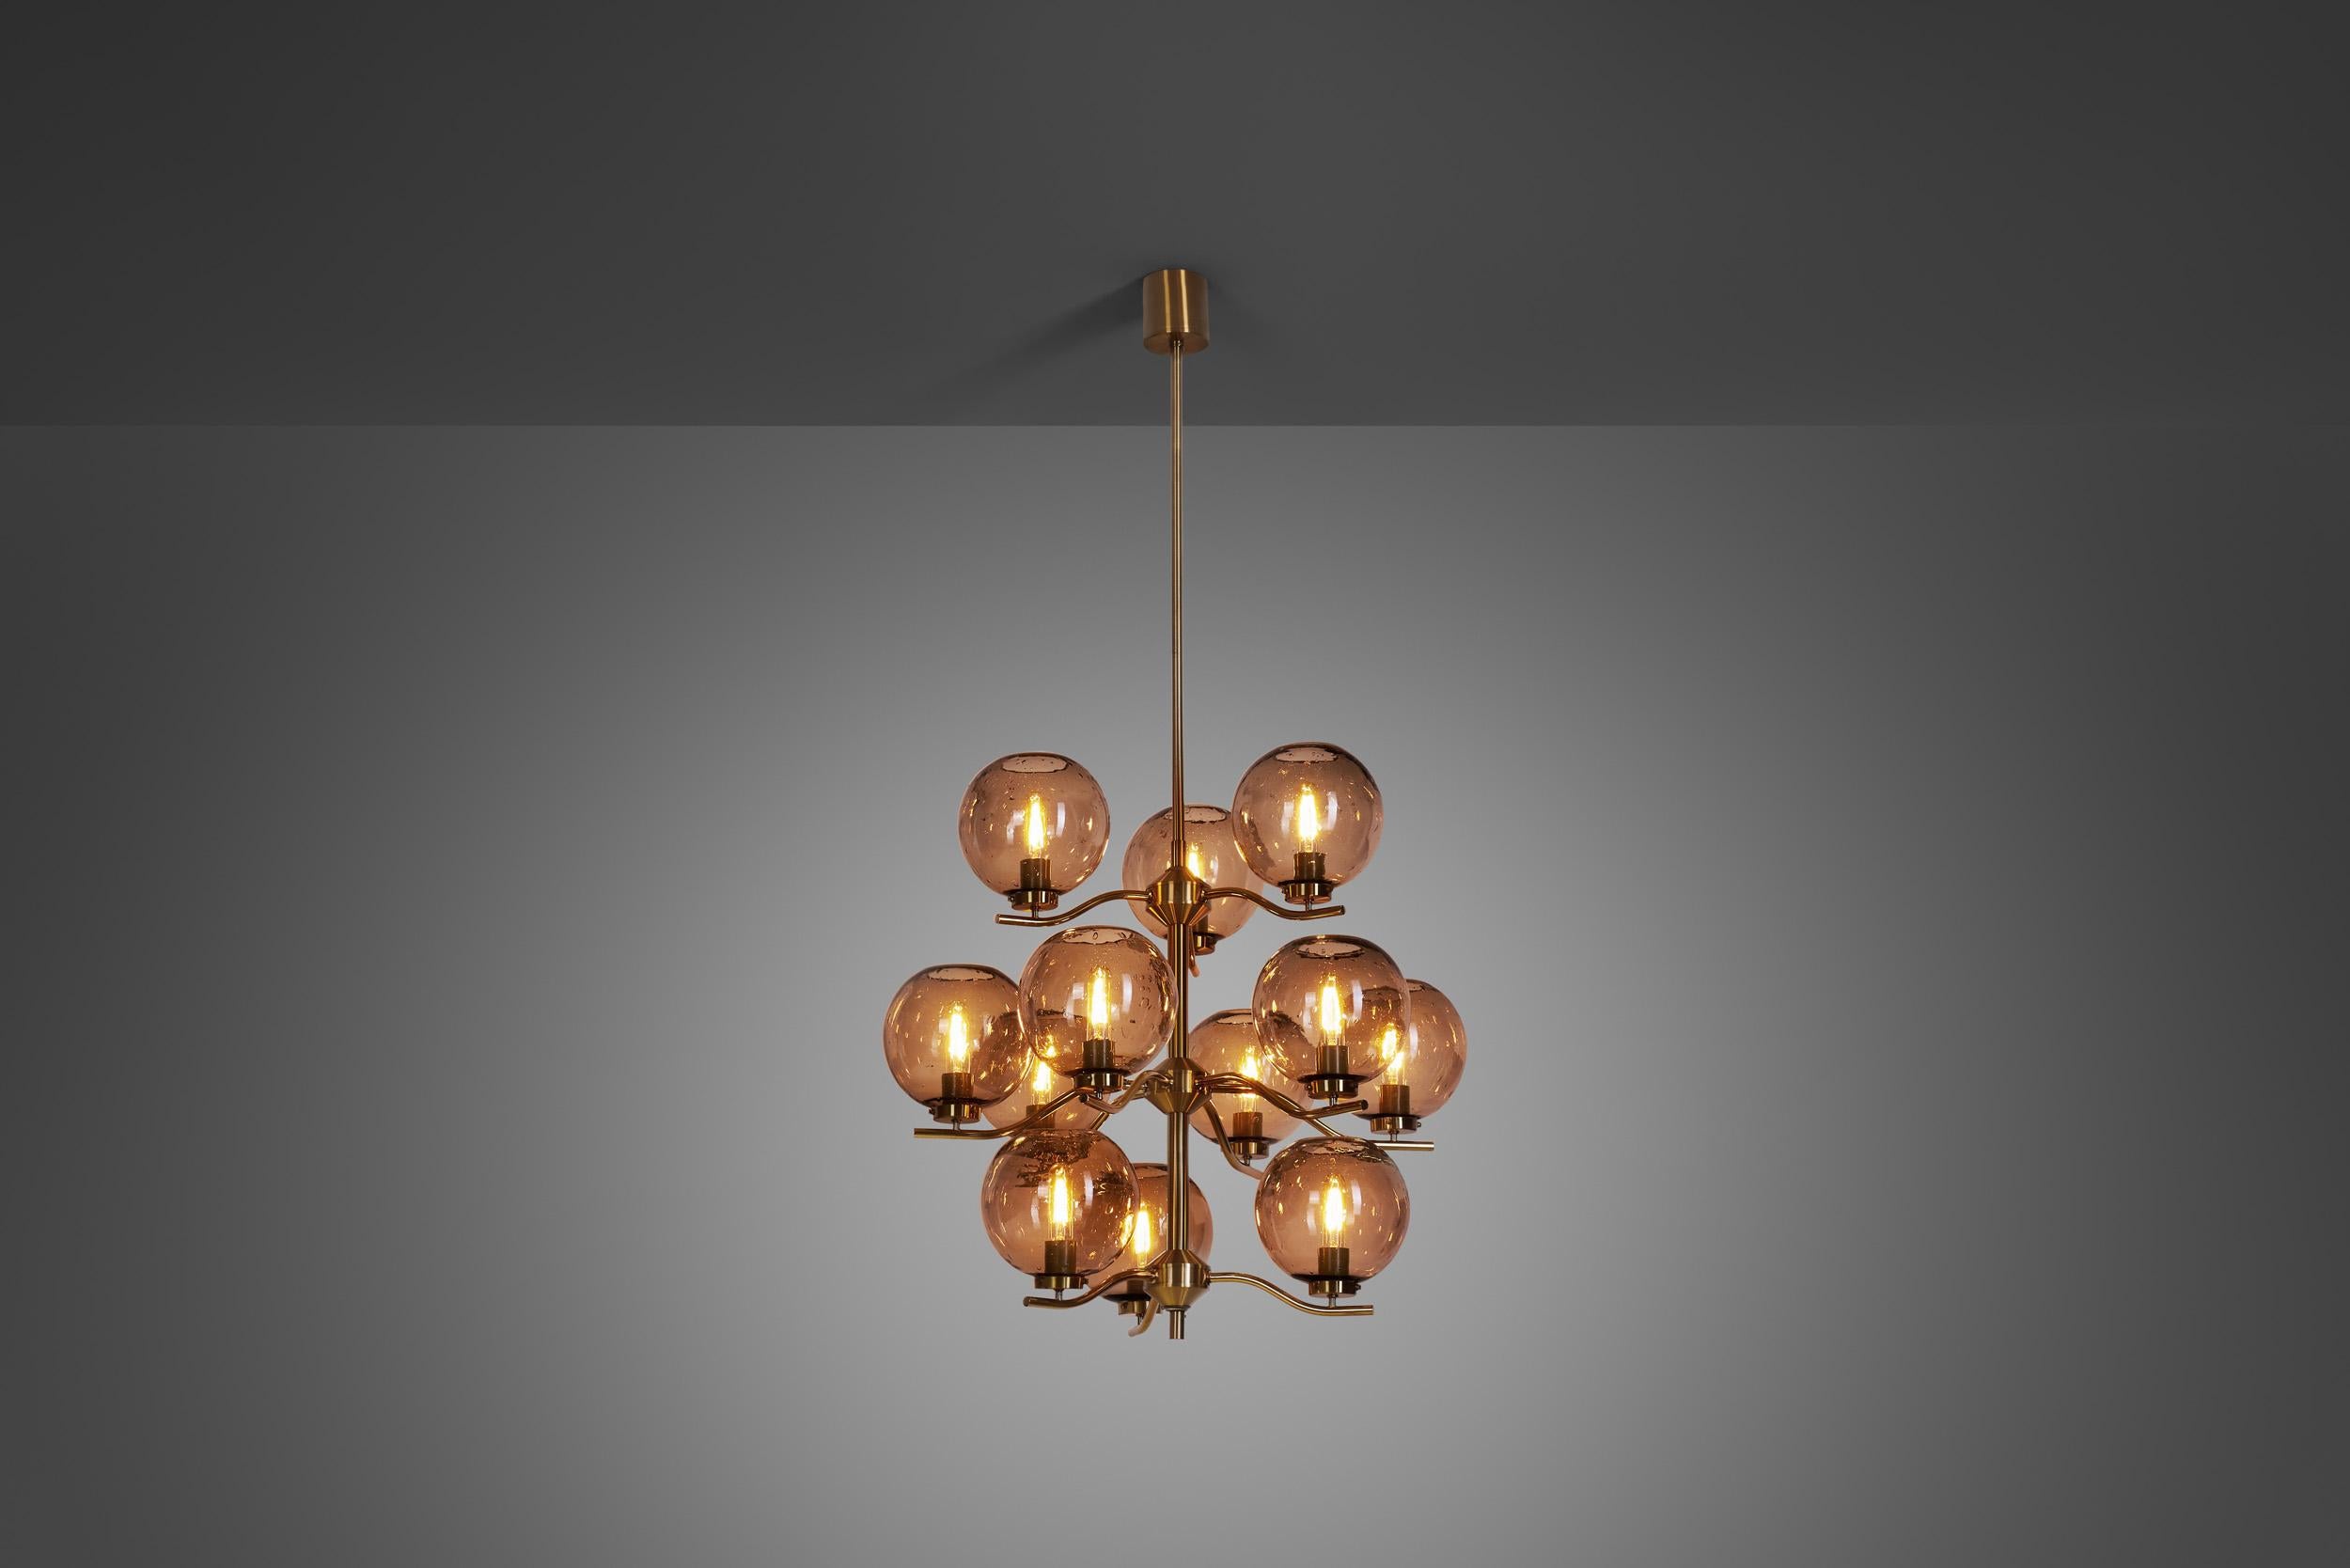 Swedish Holger Johansson Brass Chandelier with 12 Smoked Glass Shades, Sweden 1970s